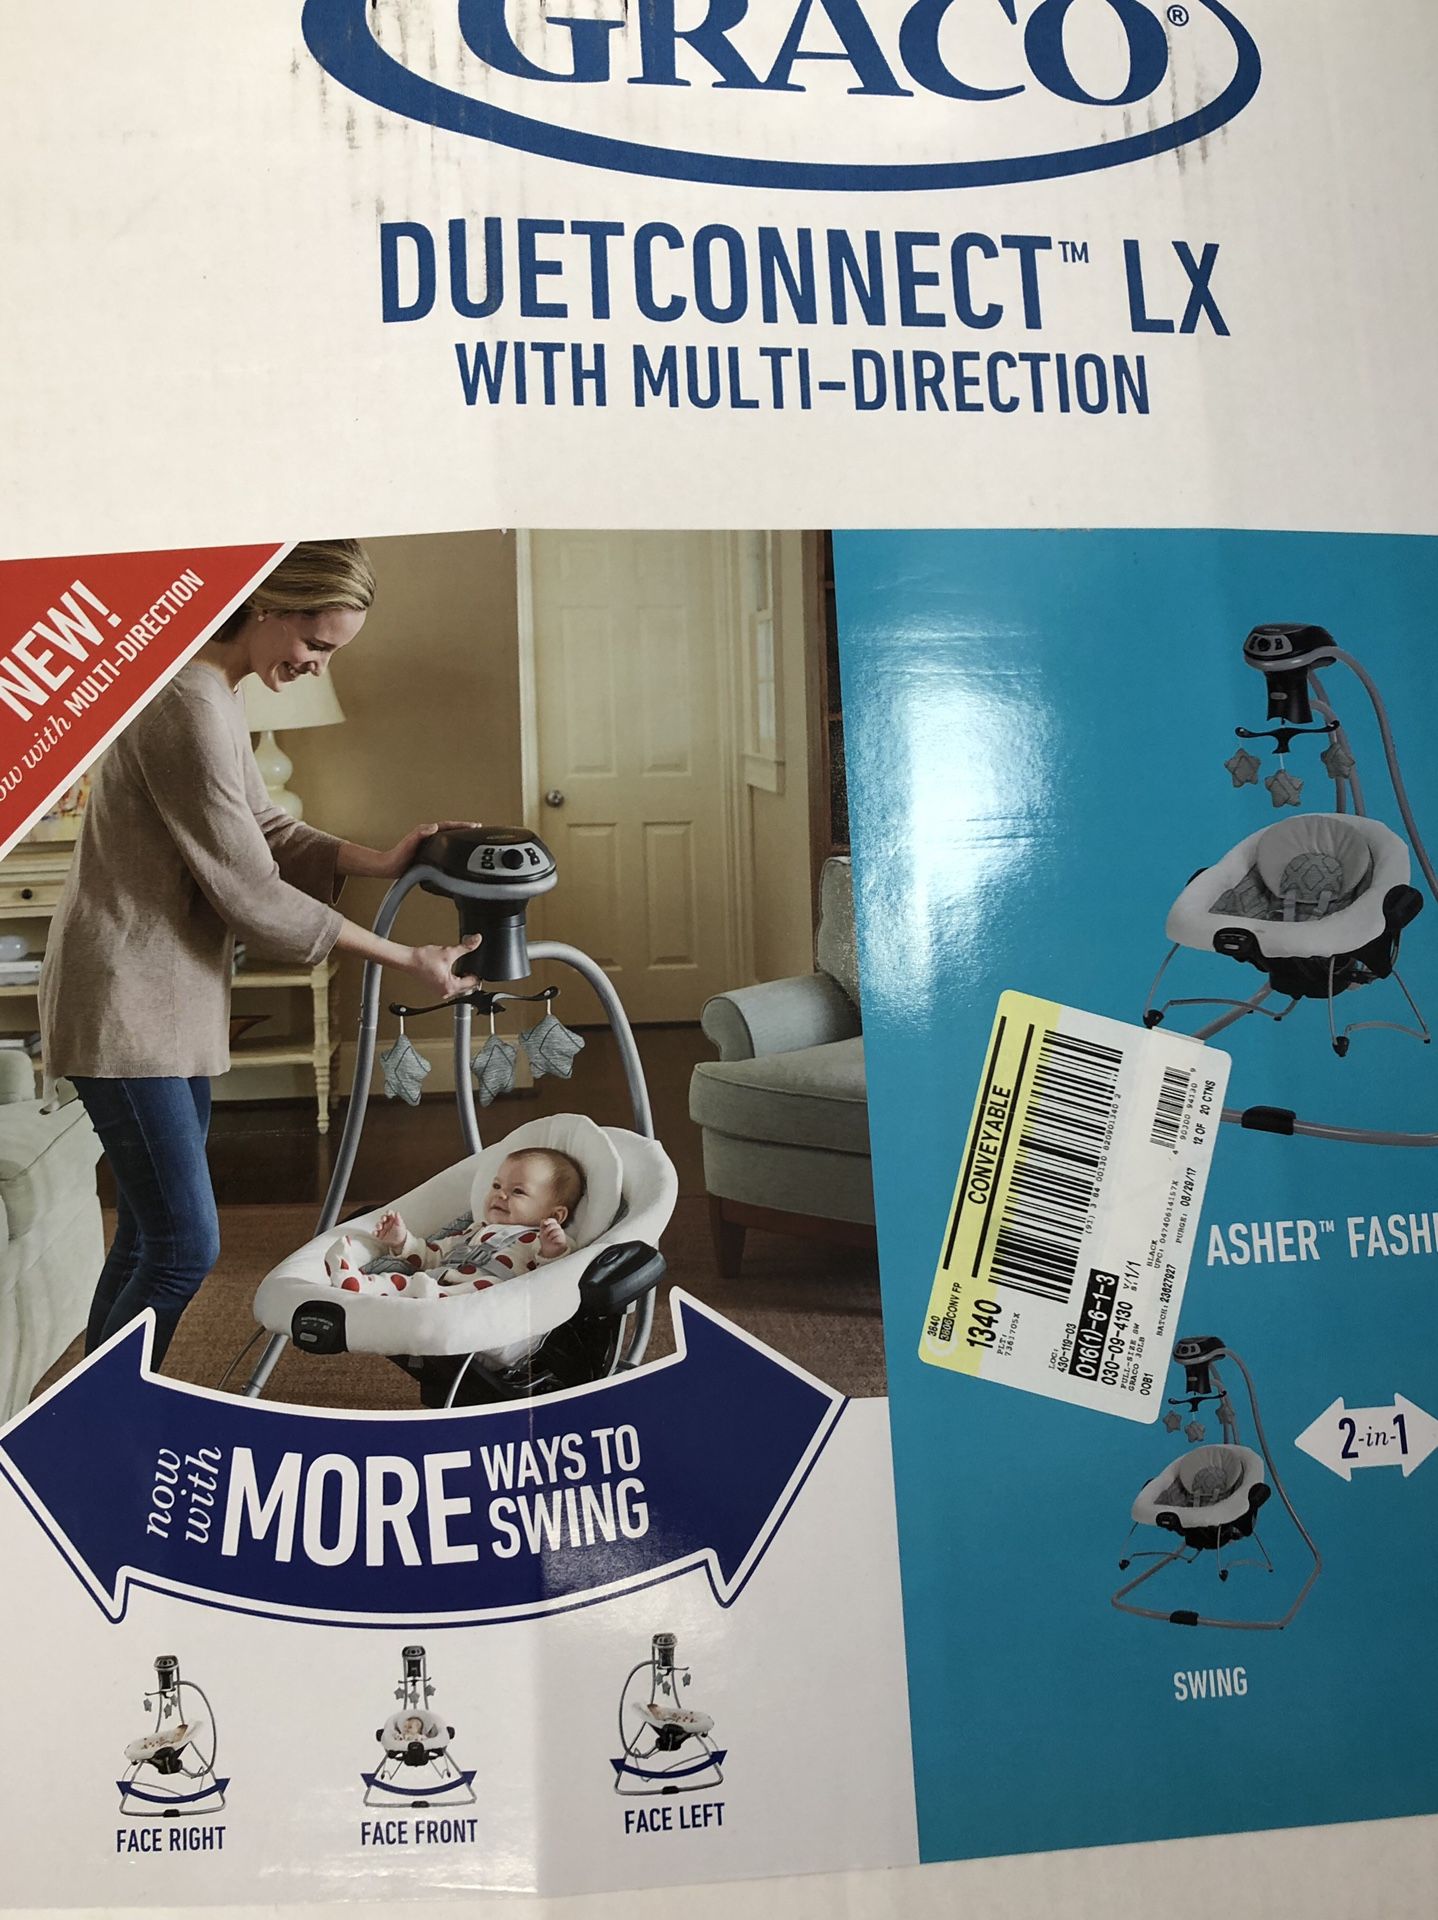 Graco duet connect multidirectional baby infant swing, portable bouncy chair, 3 ways to swing